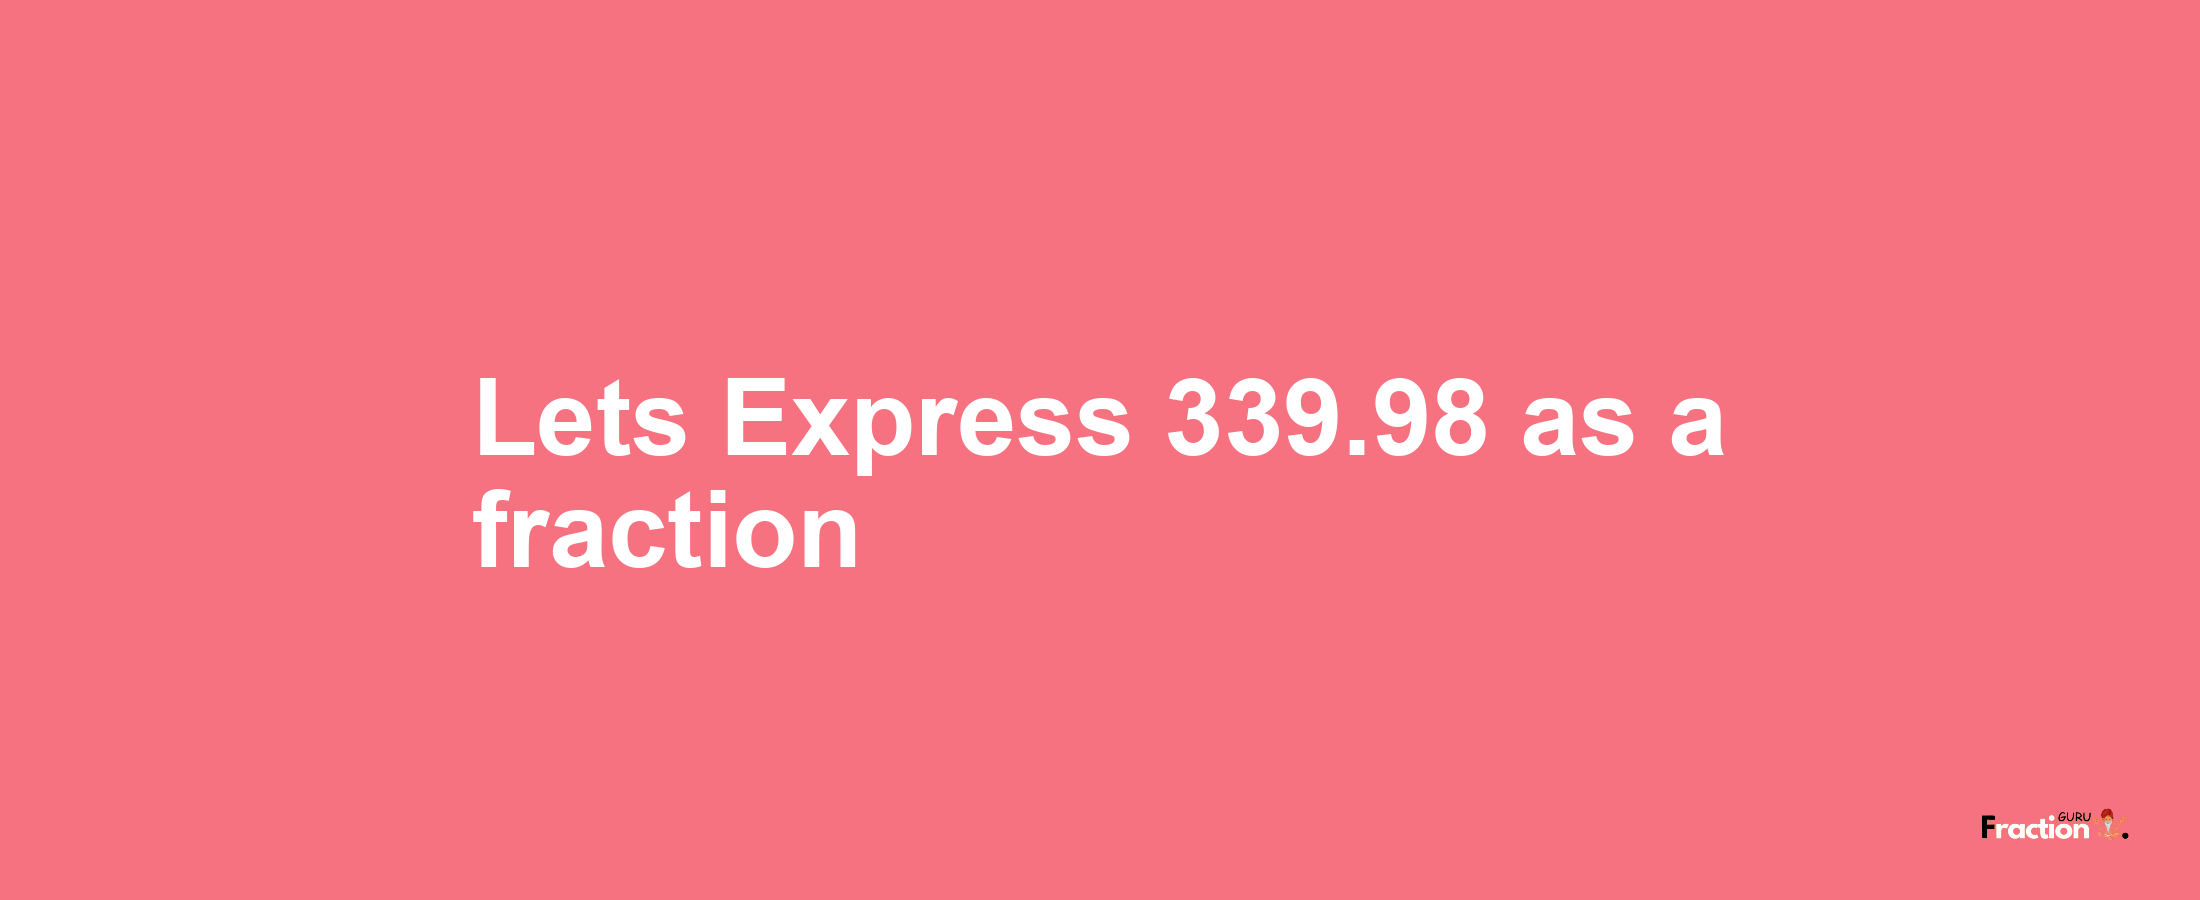 Lets Express 339.98 as afraction